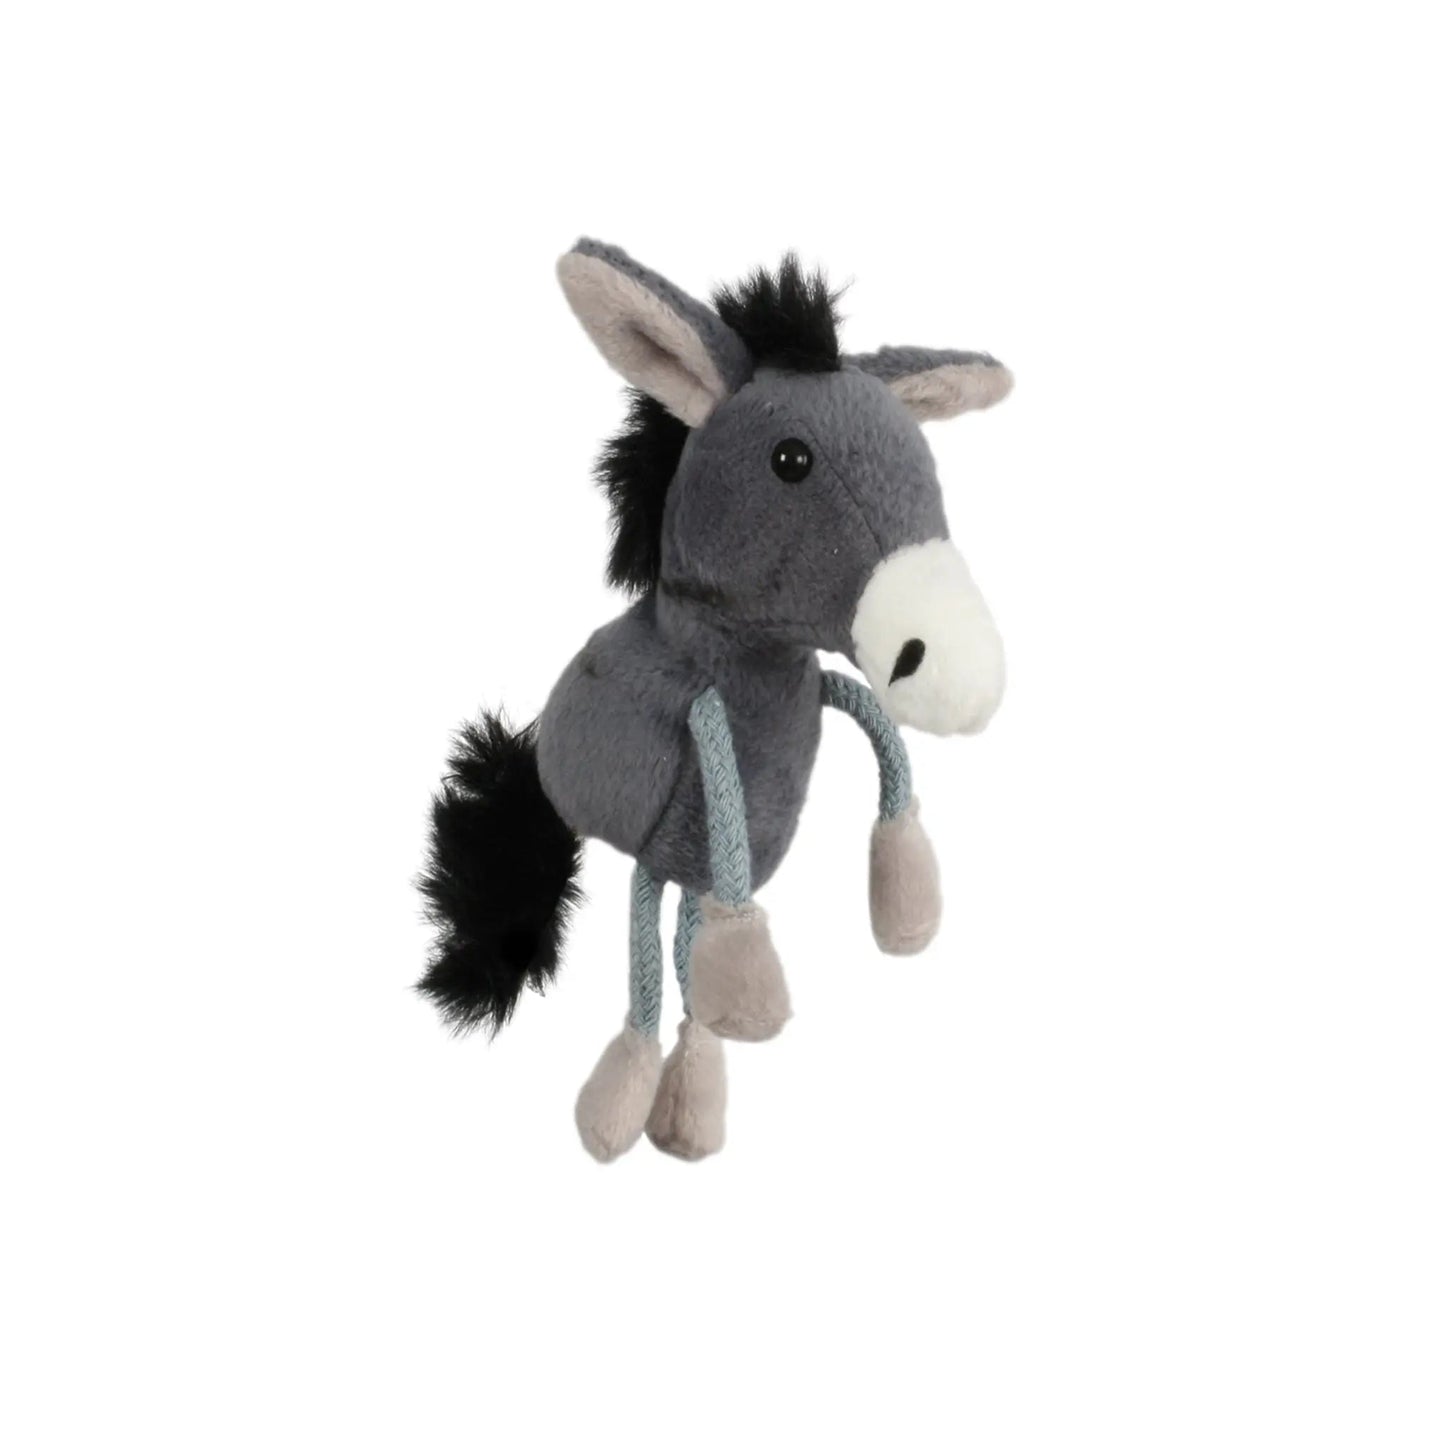 Donkey Finger Puppet - The Puppet Company - The Forgotten Toy Shop